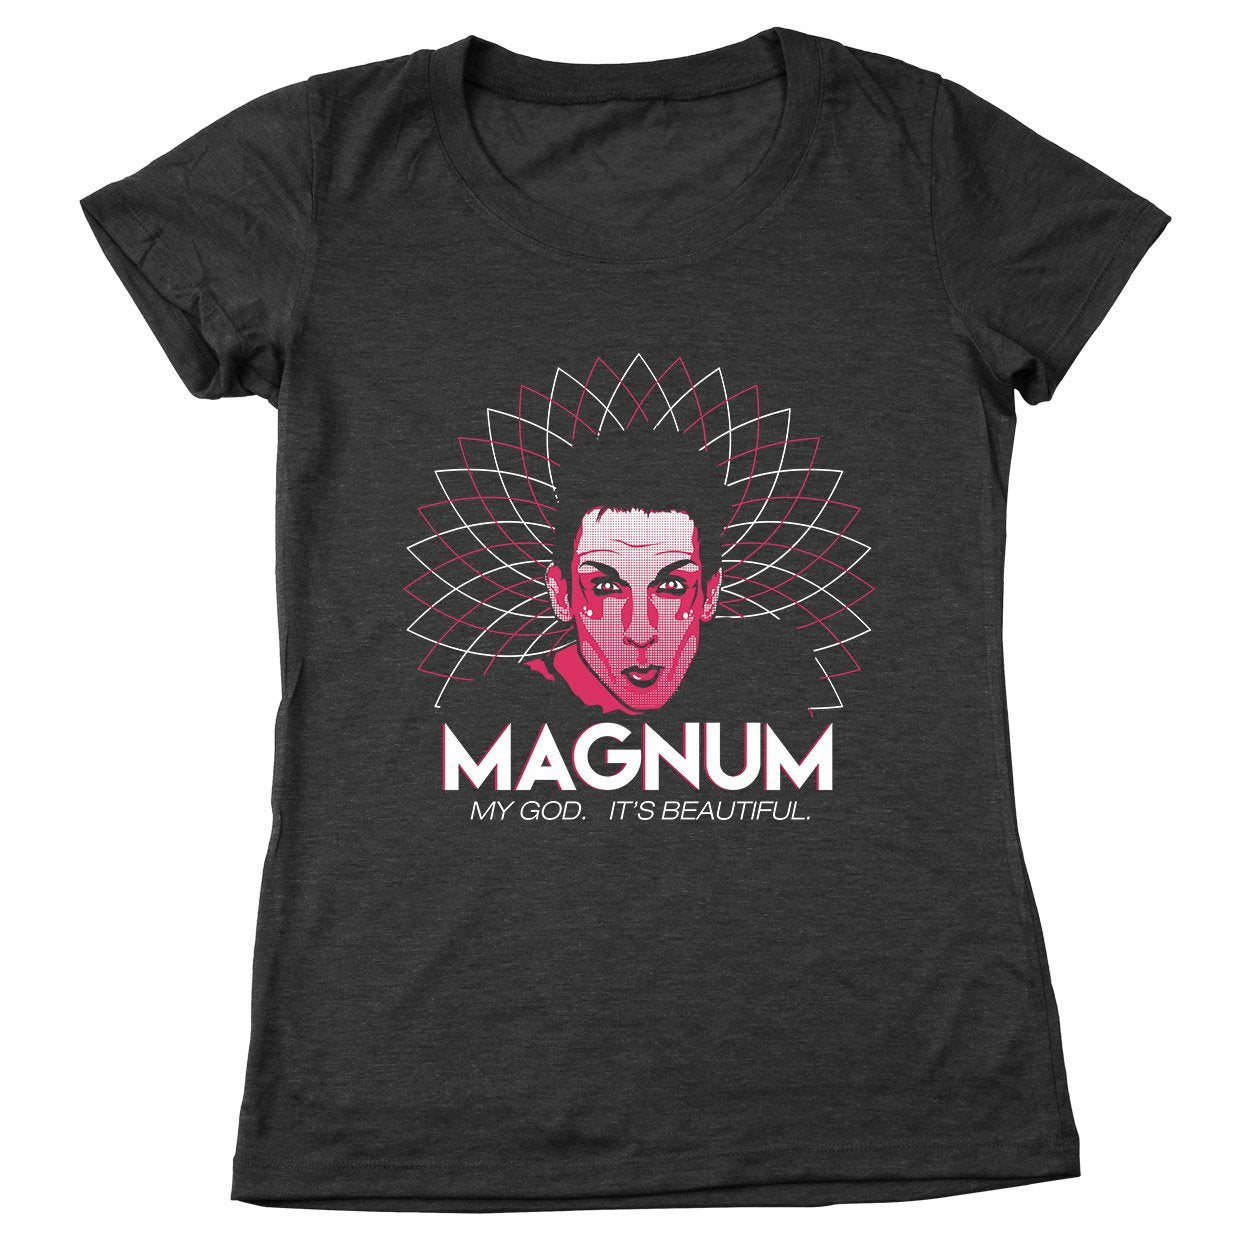 Magnum My God It's Beautiful Women's Relaxed Fit Tri-Blend T-Shirt